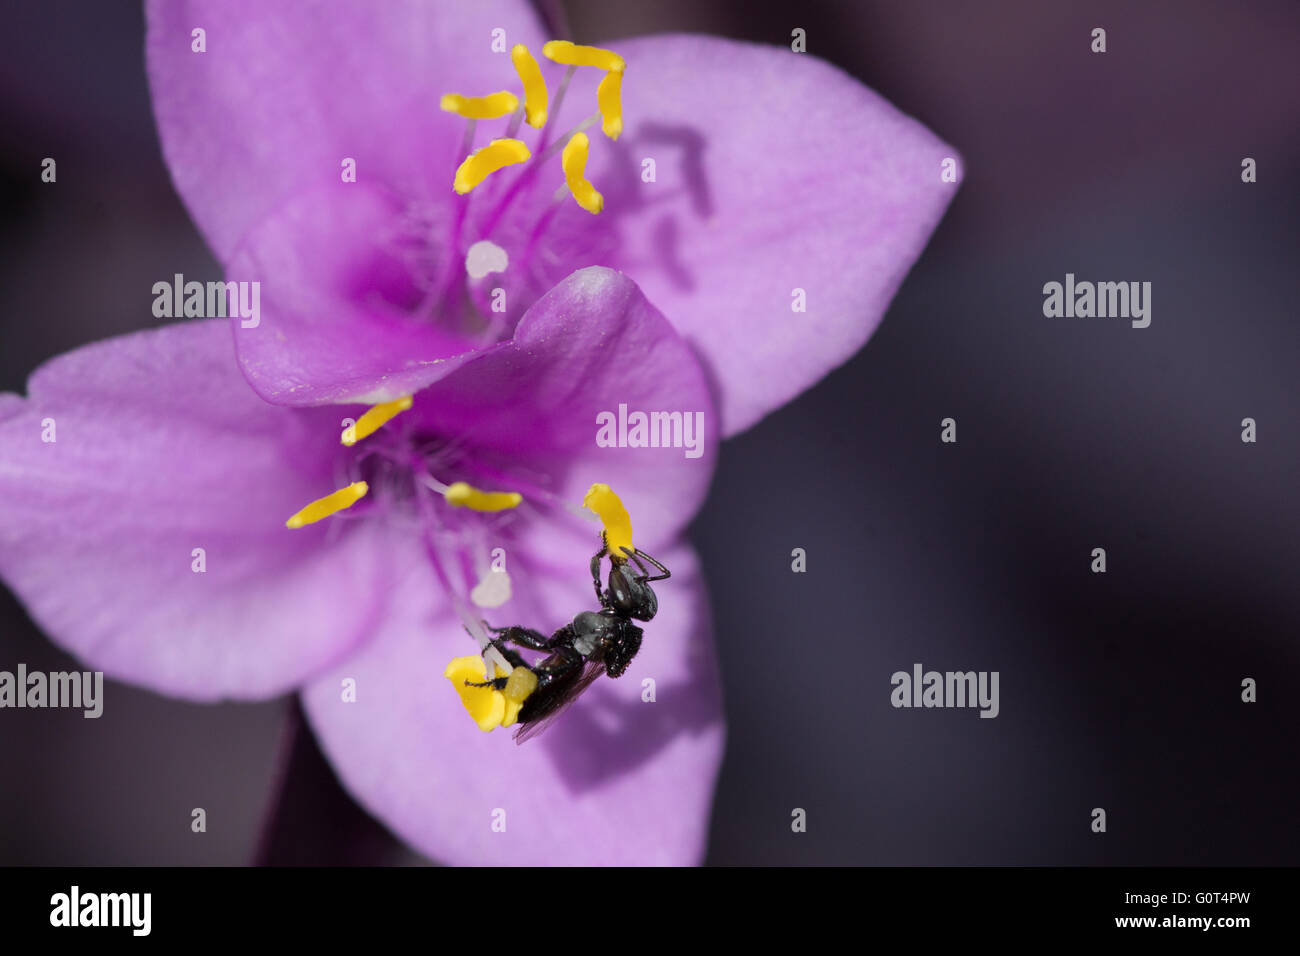 Australian native bee collecting pollen from purple flower Stock Photo